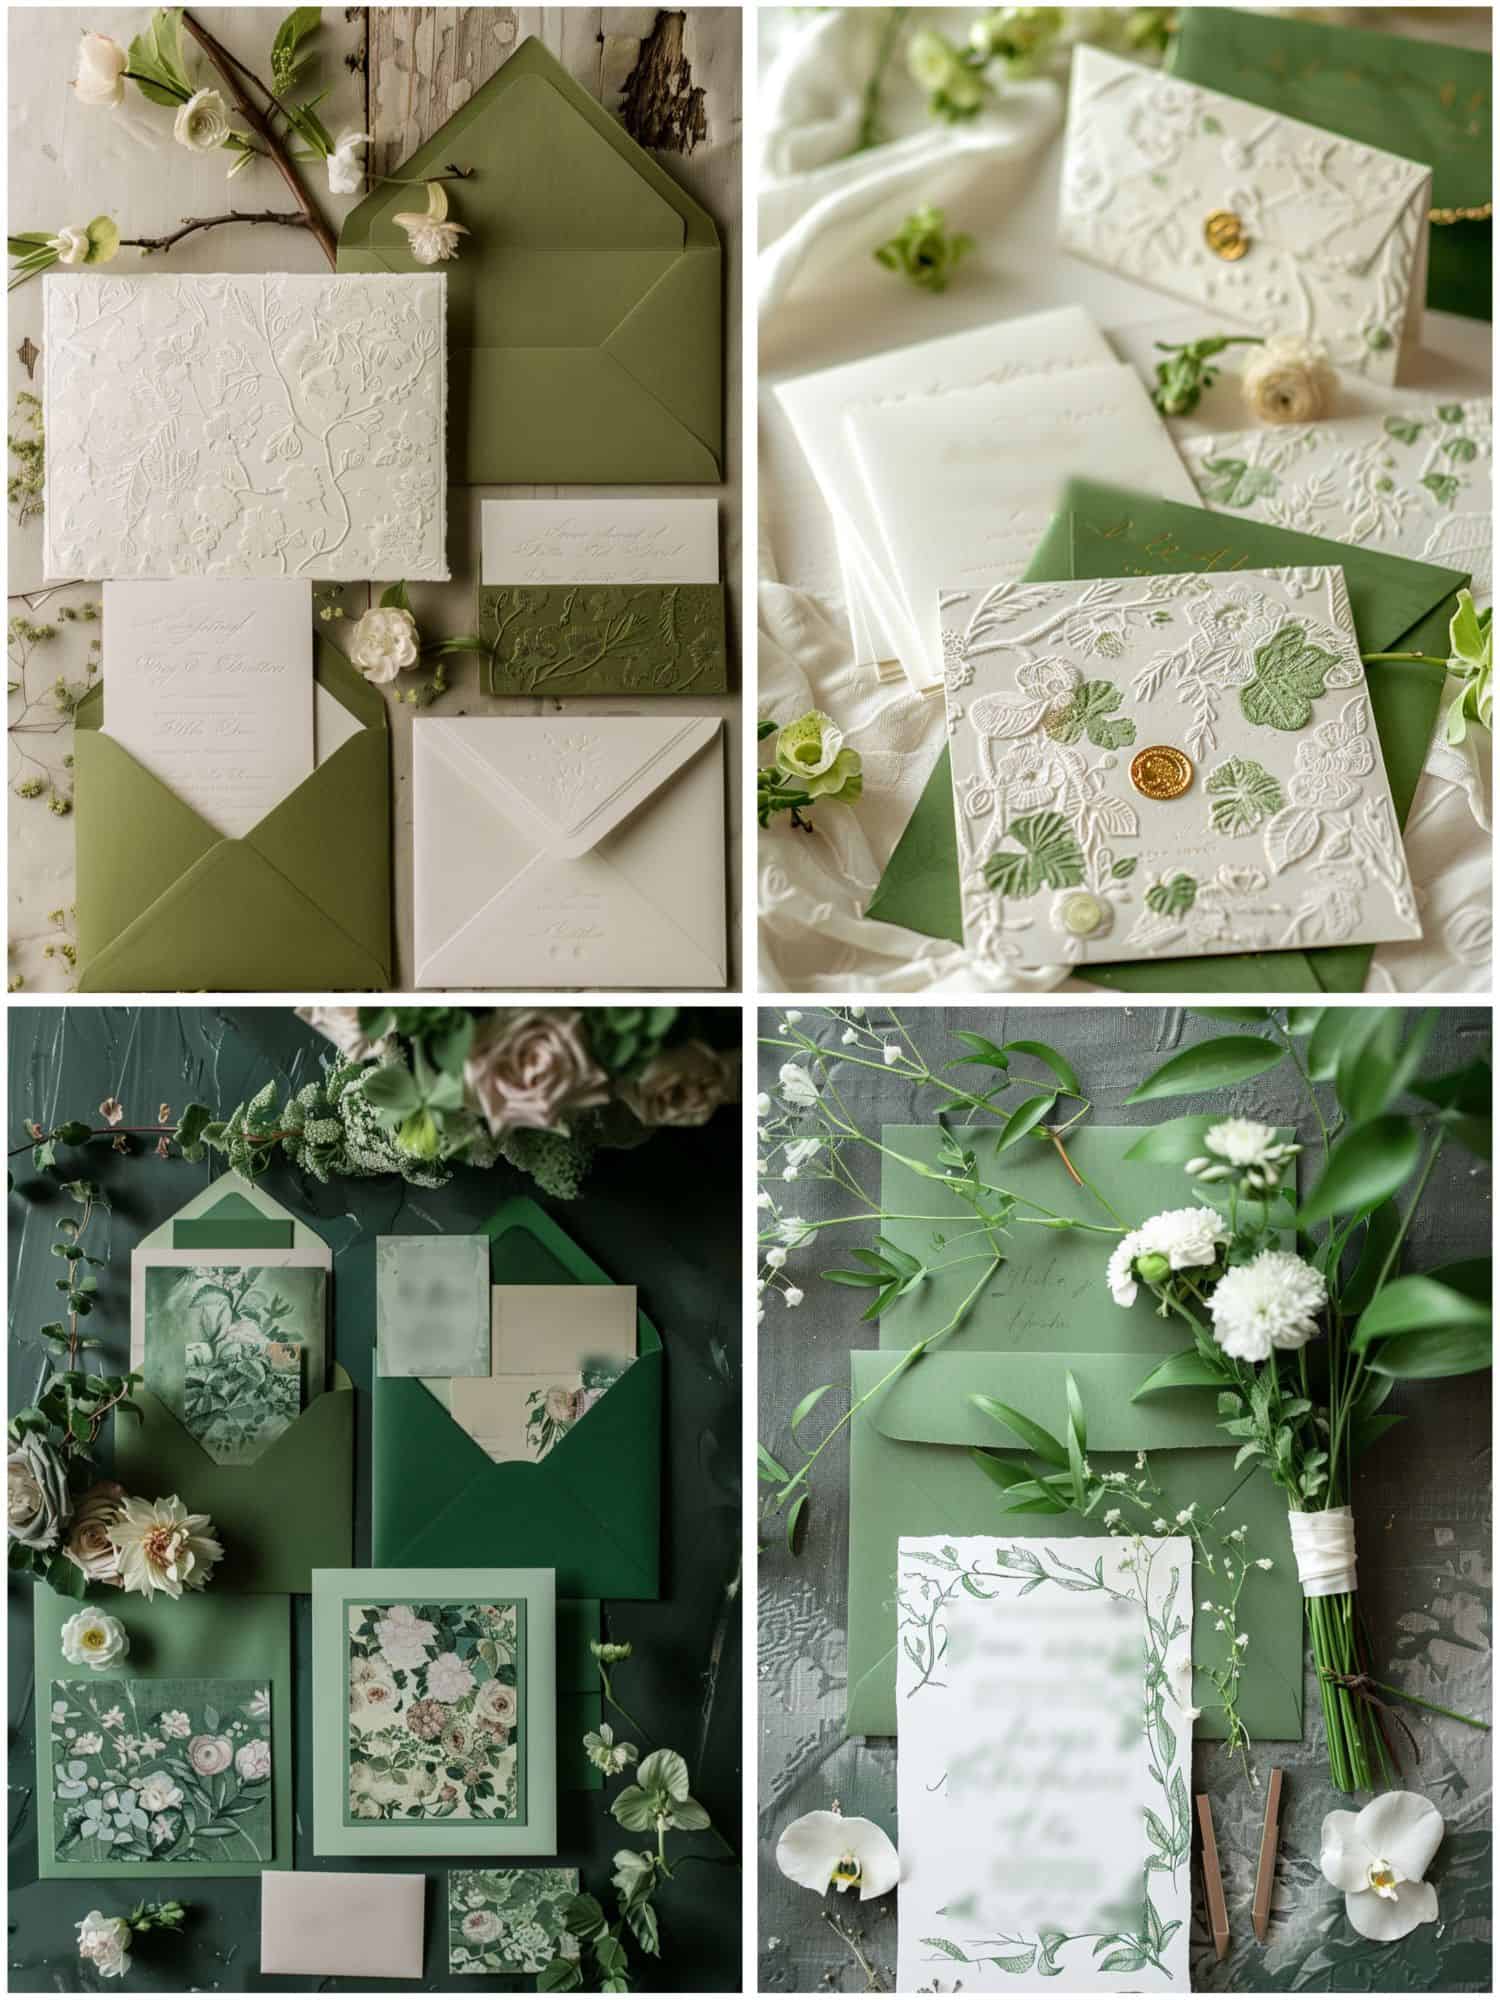 green and white wedding theme ideas for invitations